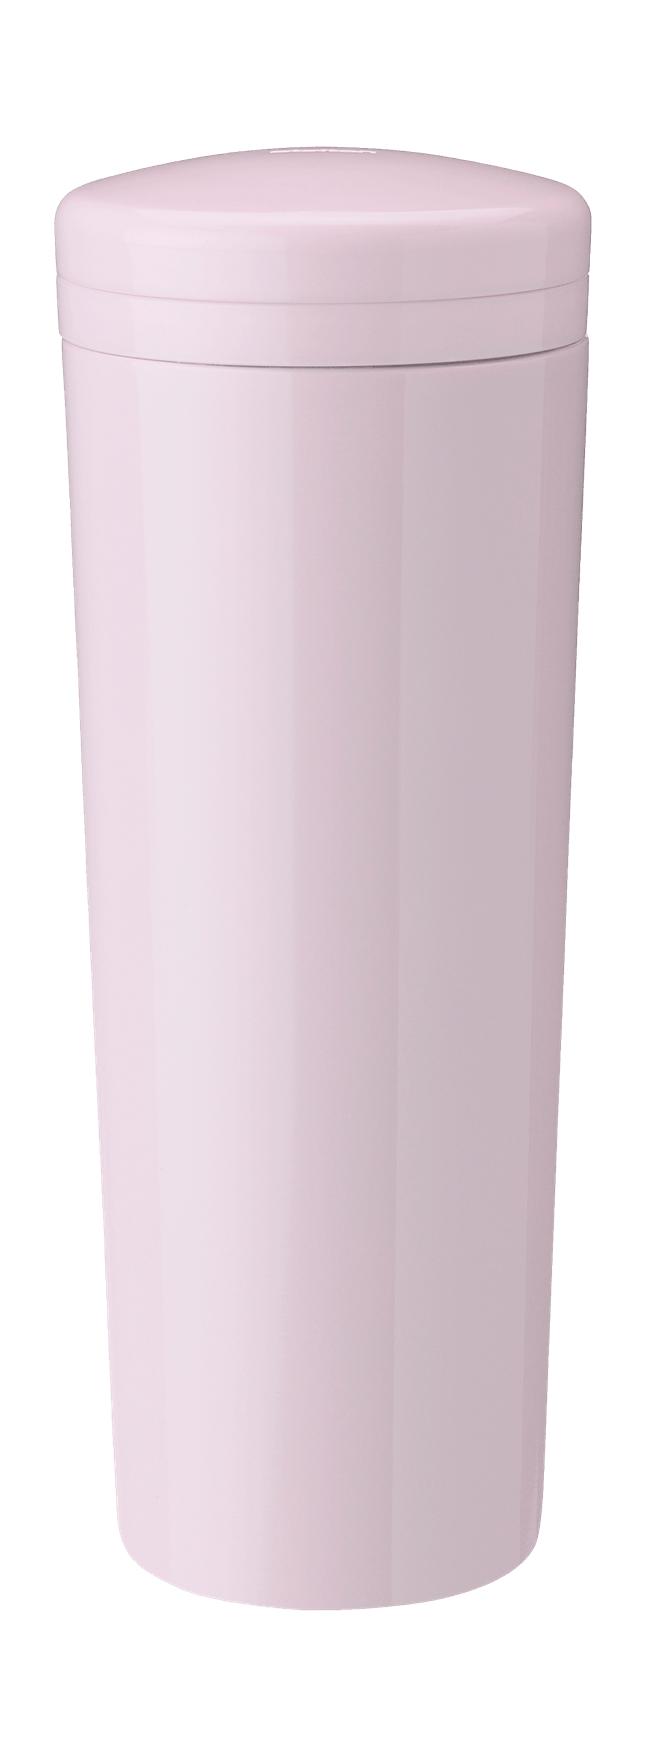 Stelton Carrie Thermos flaska 0,5 L, Rose